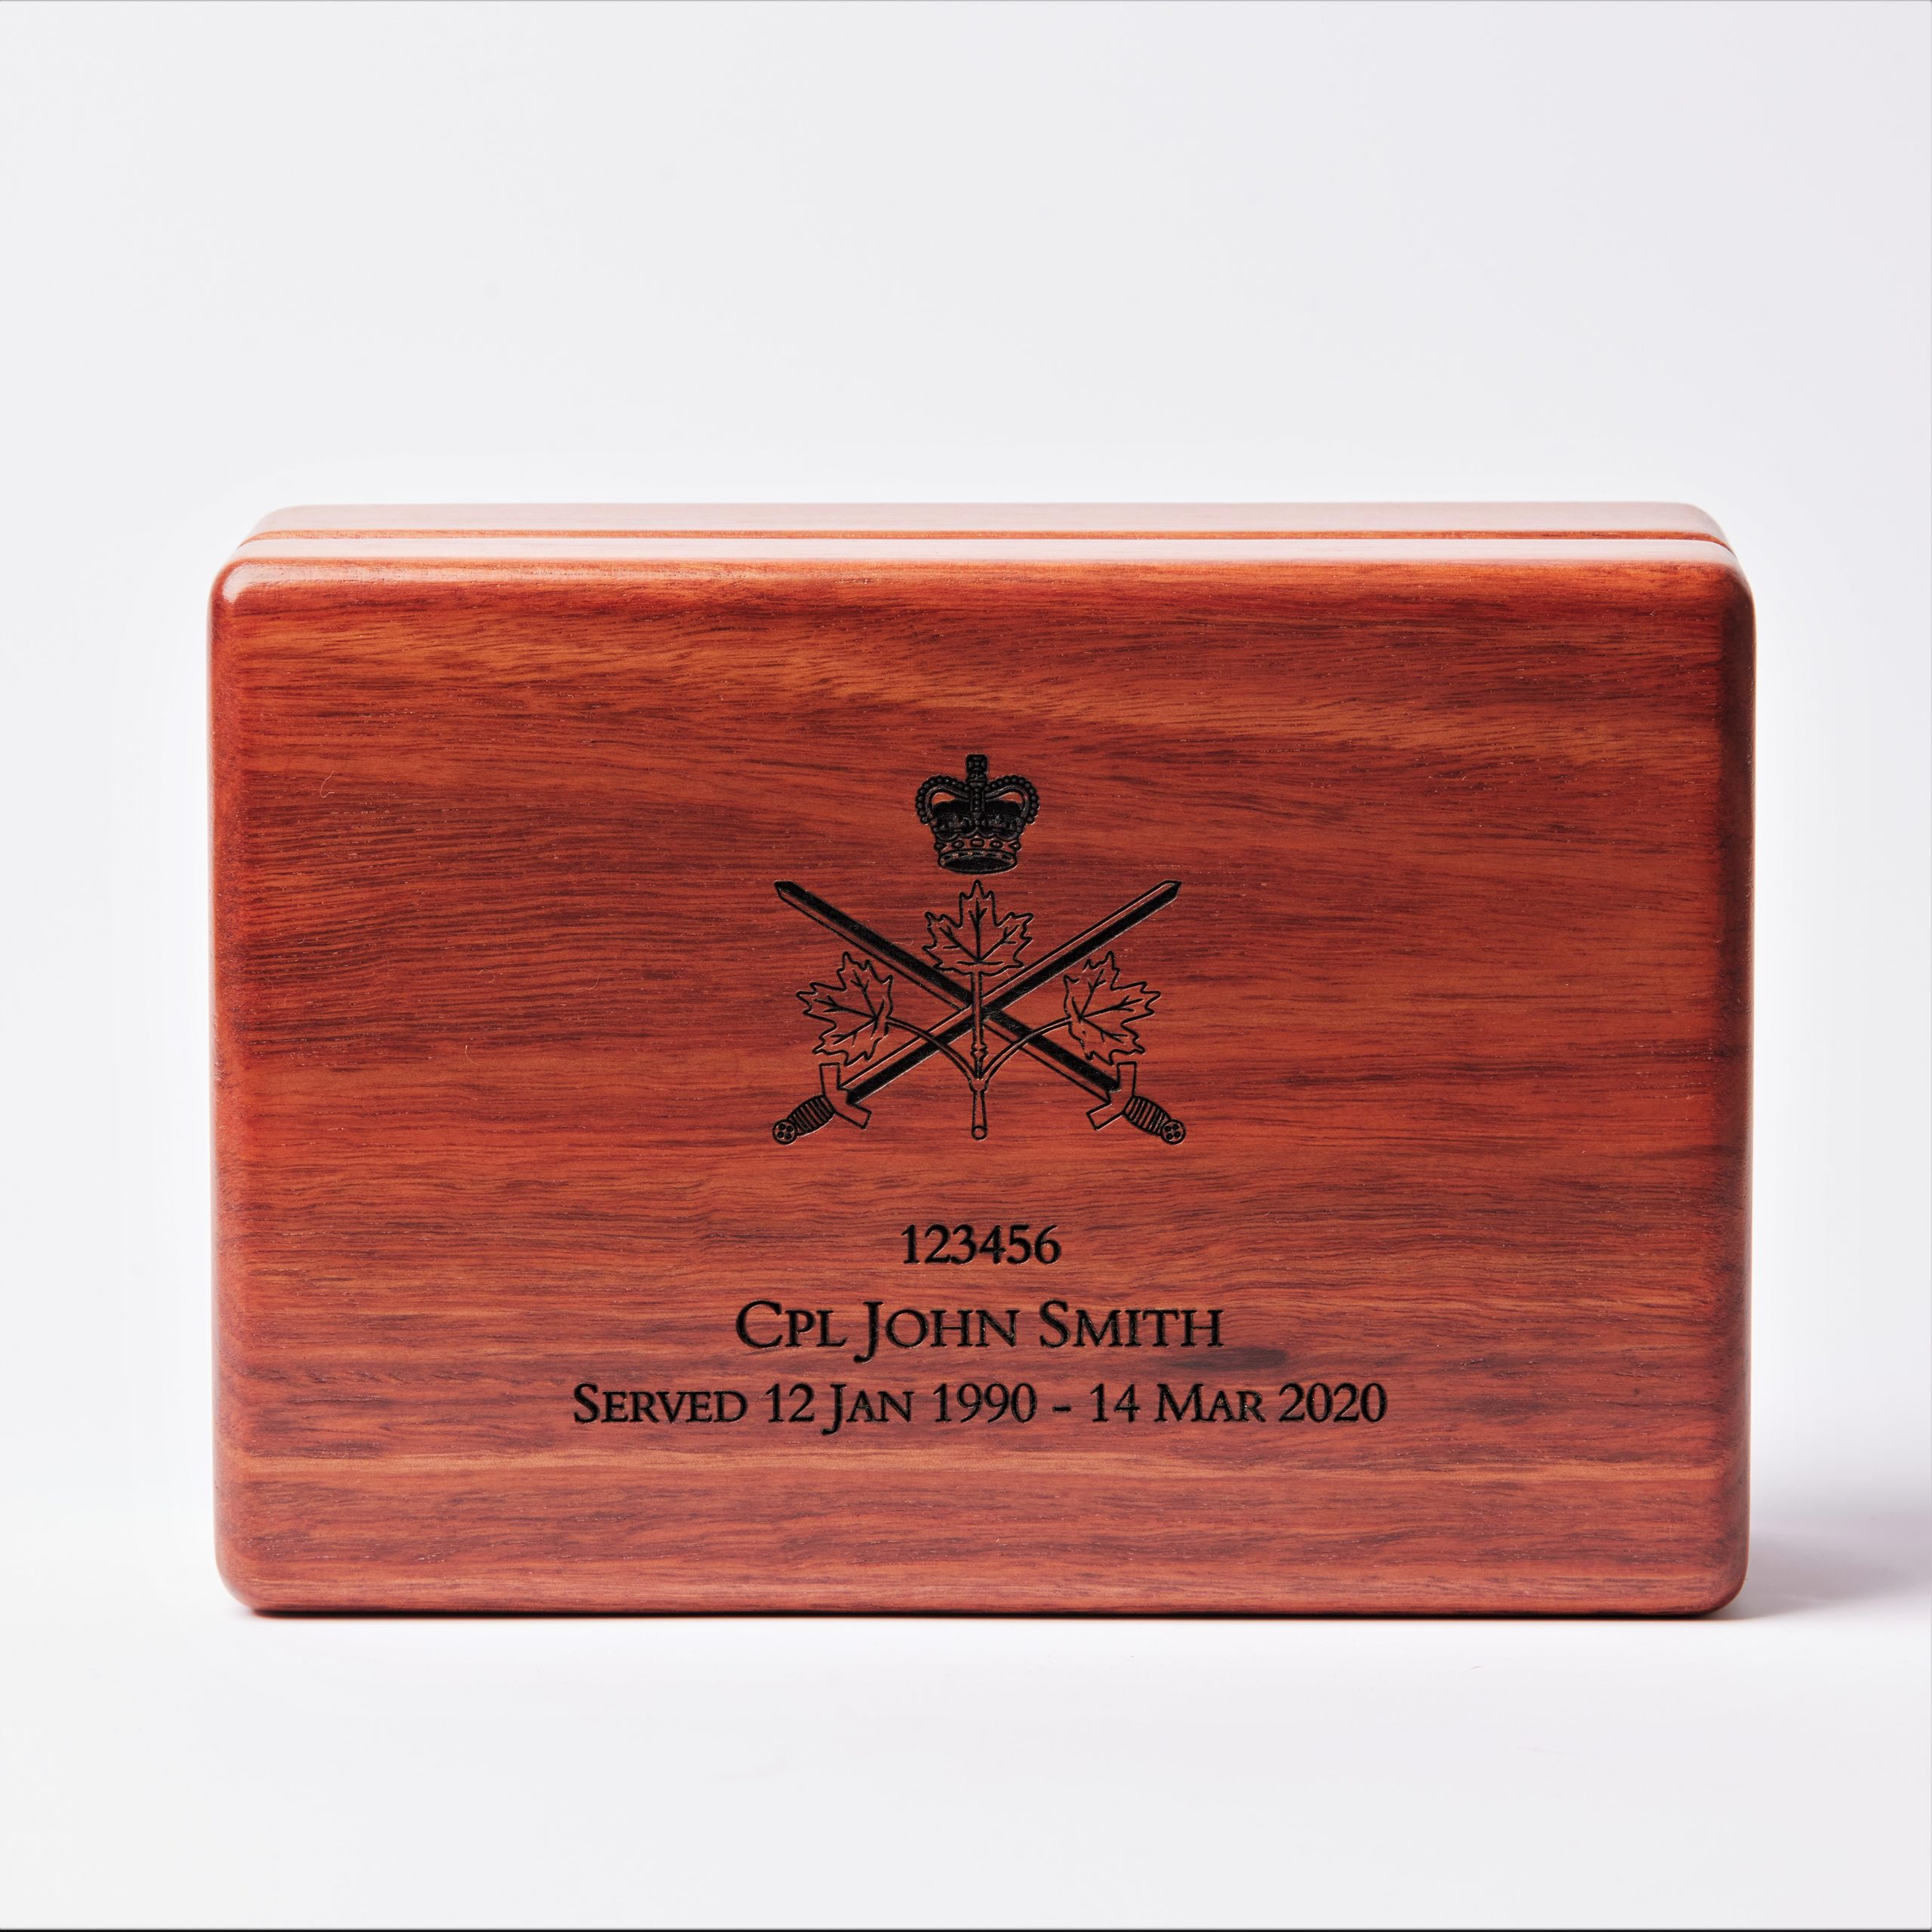 A medium medal display case by Murhpy's of Healesville, built from Australian hardwood and engraved with a military emblem from canada.